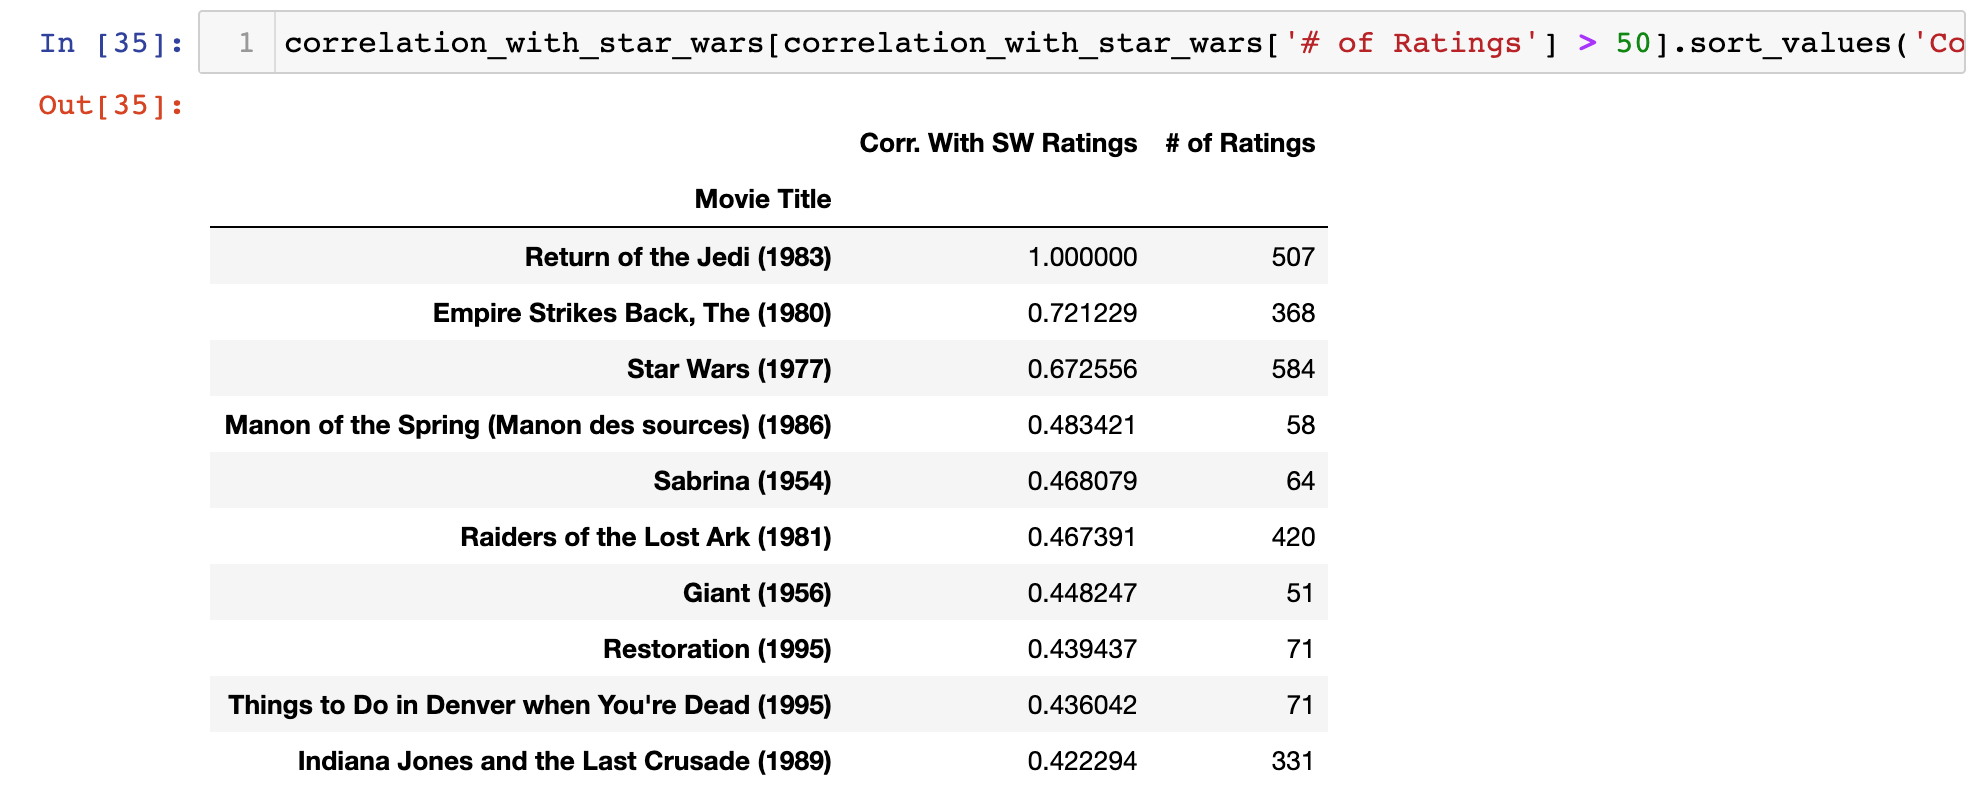 The 10 movies most similar to Star Wars